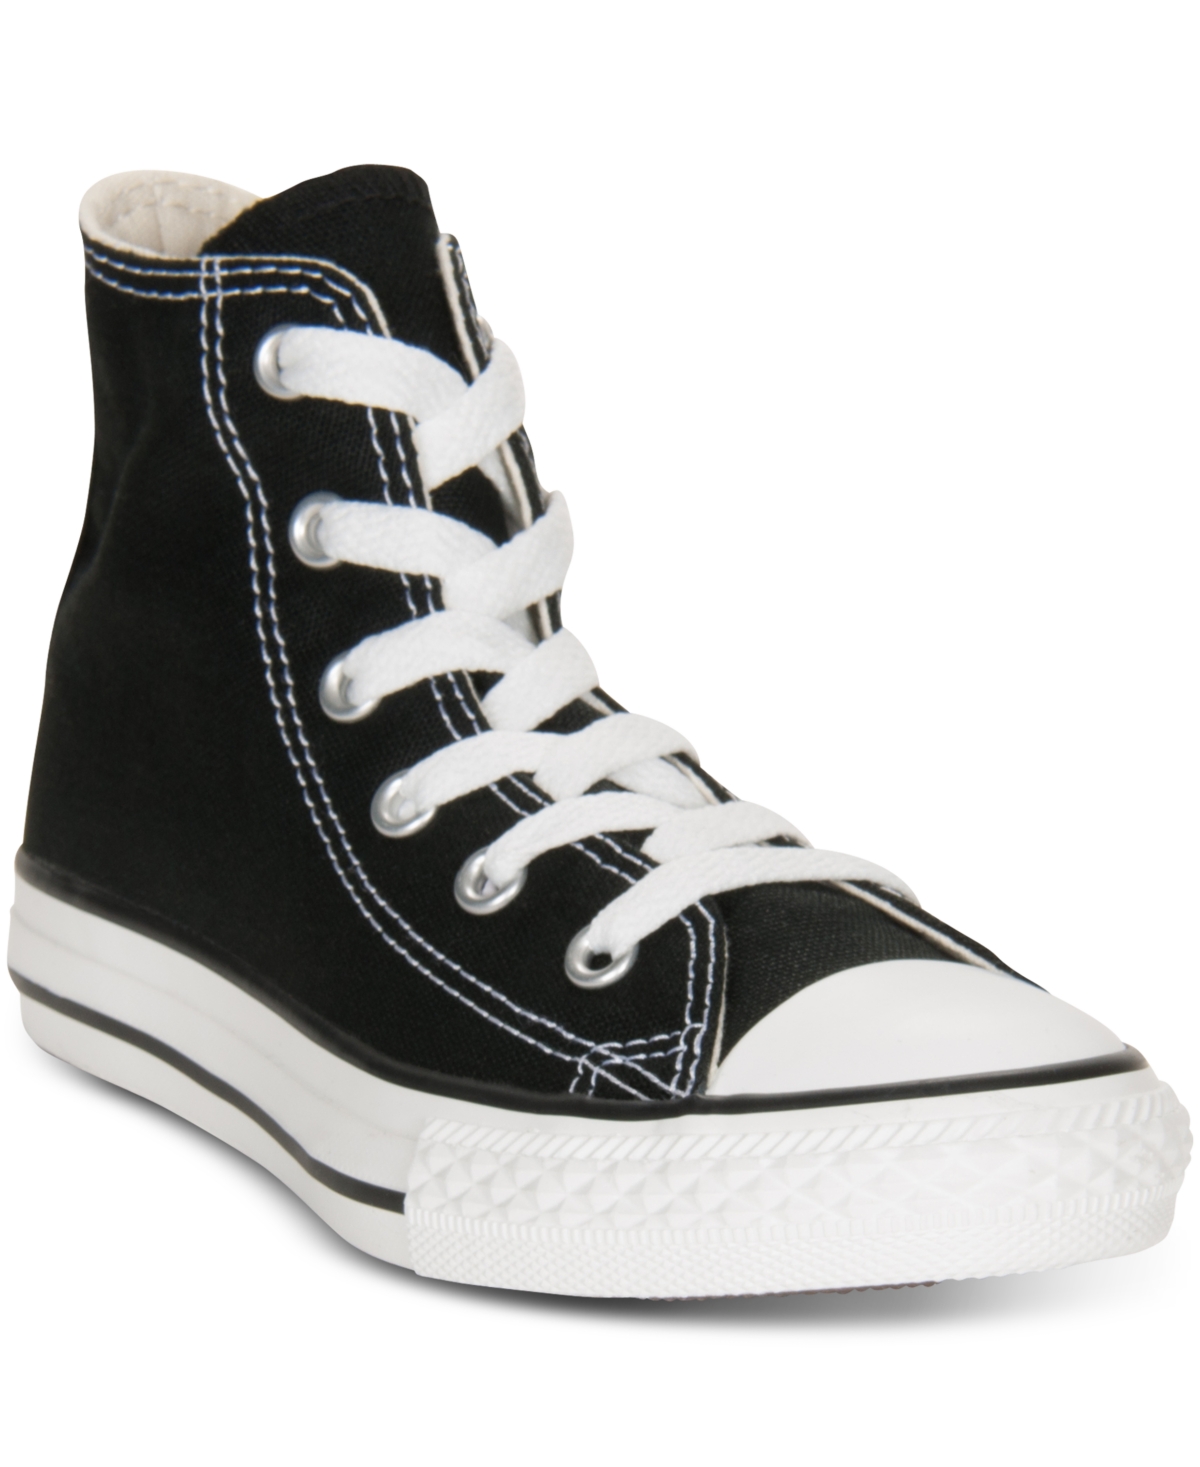 UPC 022866376815 product image for Converse Little Kids Chuck Taylor Hi Casual Sneakers from Finish Line | upcitemdb.com